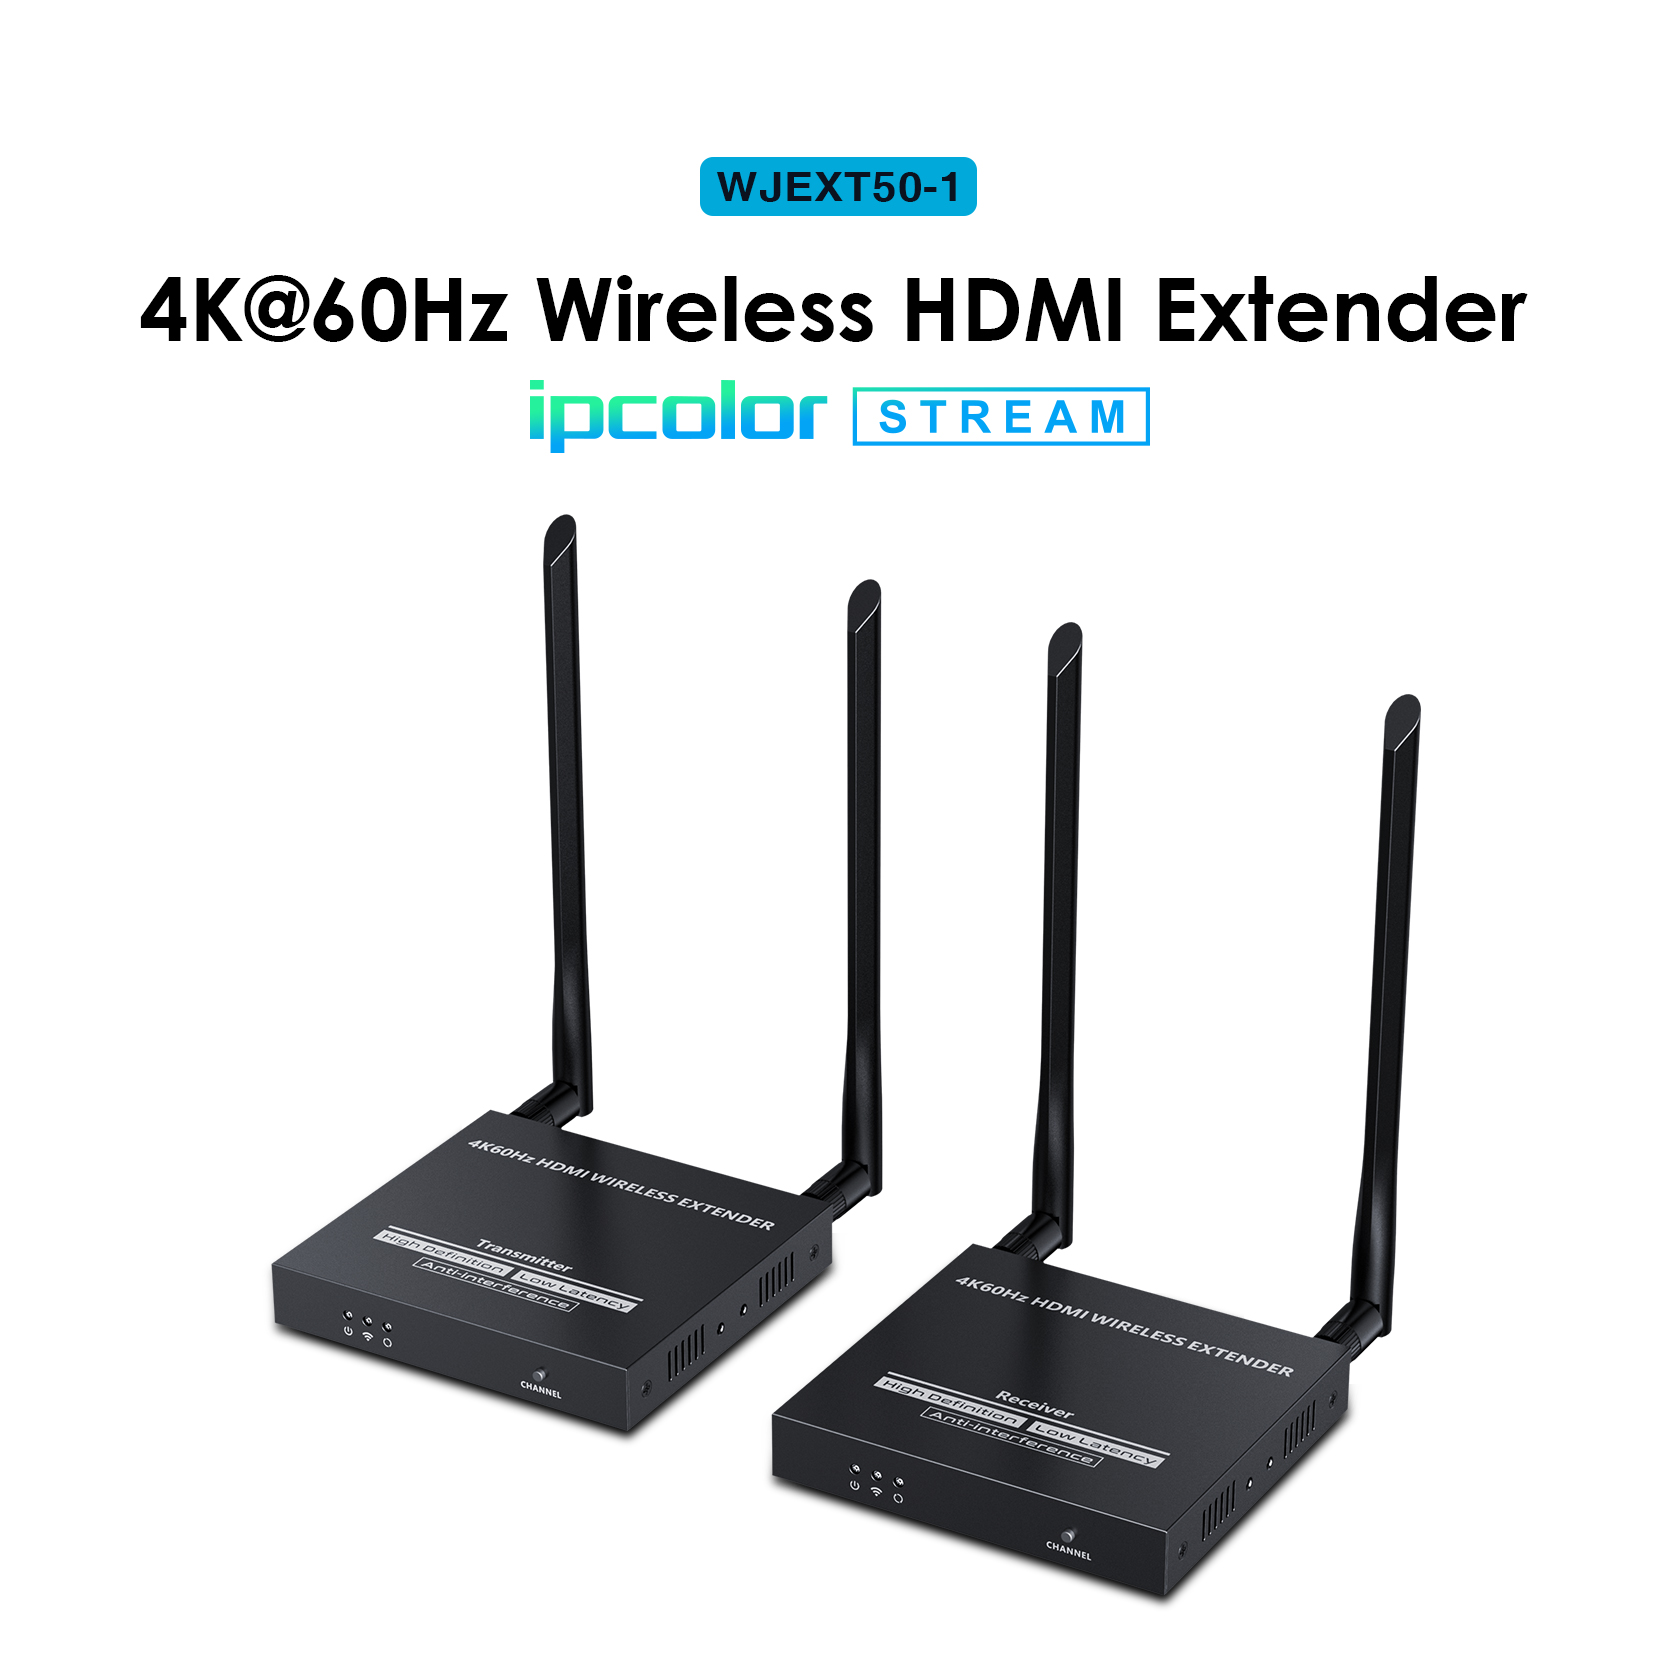 weJupit's Wireless 4kX60 HDMI Extender up to 50m (WJEXT50-1), 5G Wireless Frequency Bands, HDMI Loop Out, IR passback, SSID Pairing and Channel Switching